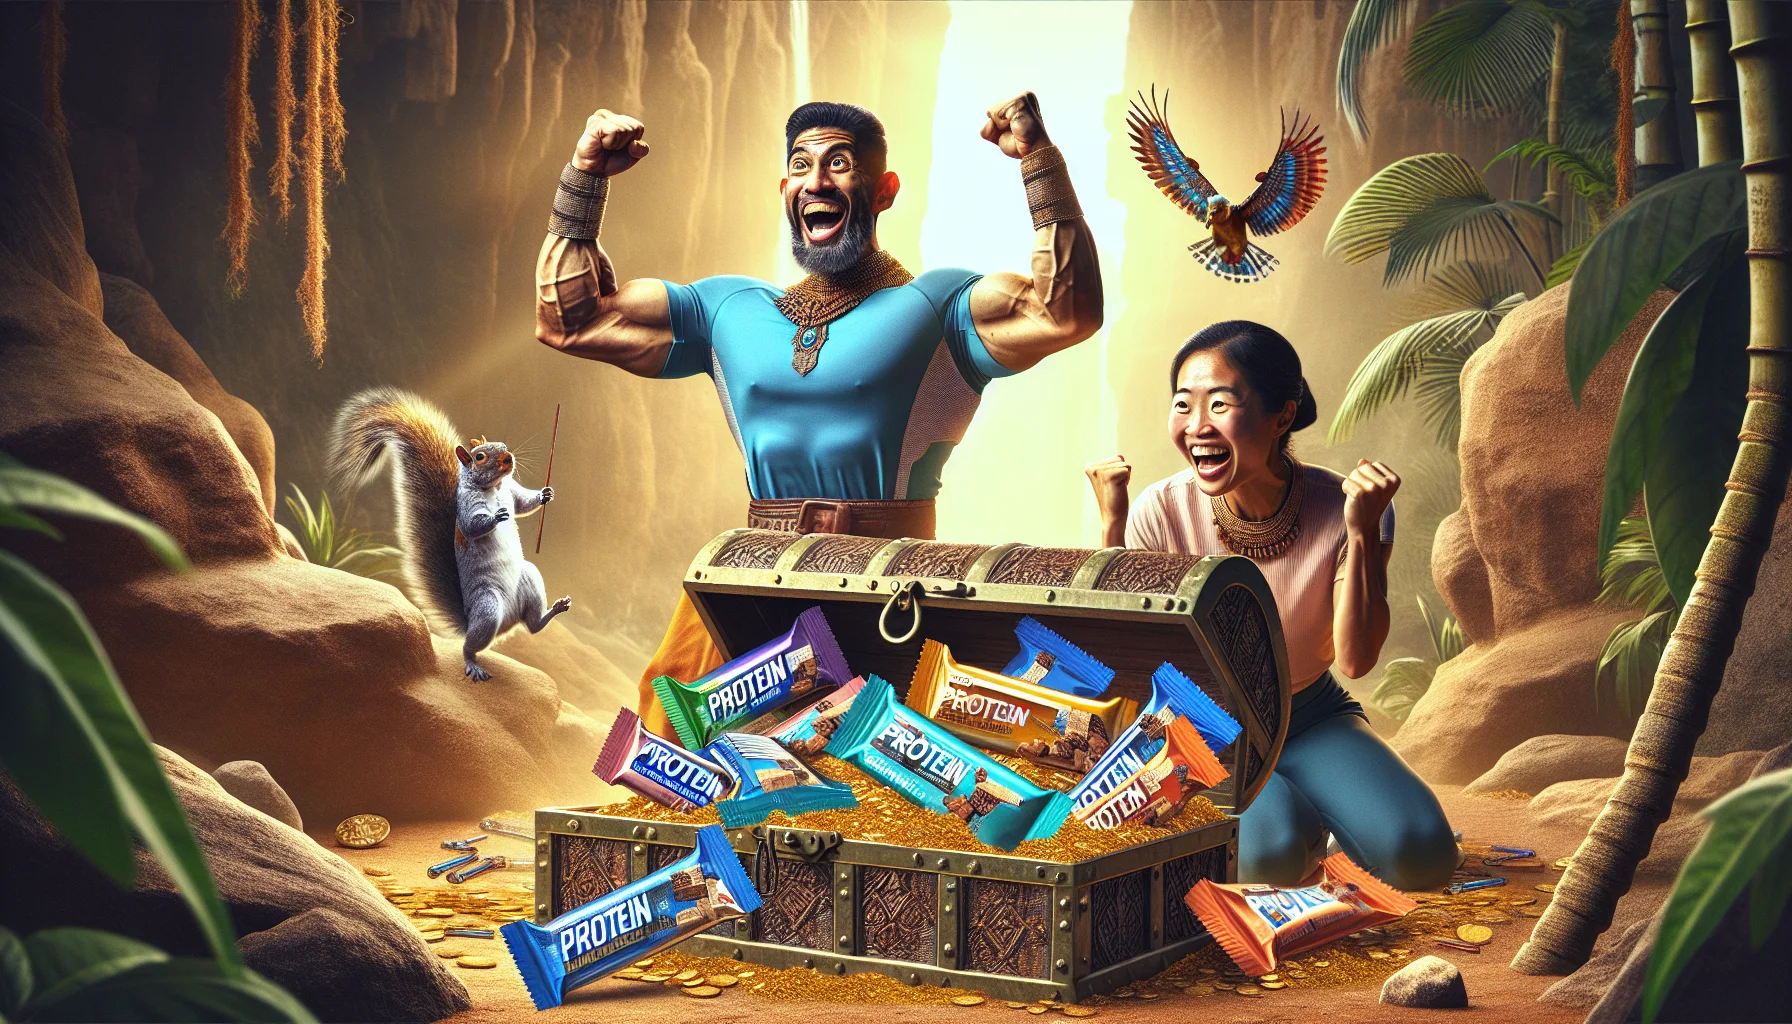 Create a highly detailed and realistic image of an amusing scene involving protein bars. Picture a Hispanic female athlete and a South Asian male bodybuilder cheering in excitement as they come across a treasure chest overflowing, not with gold coins, but with a variety of protein bars. The bars are of different sizes and colors, a testament to the diversity of protein supplements available for sports enthusiasts. On the side, a cheeky squirrel is attempting to make away with one of the protein bars, contributing to the levity of the scene.